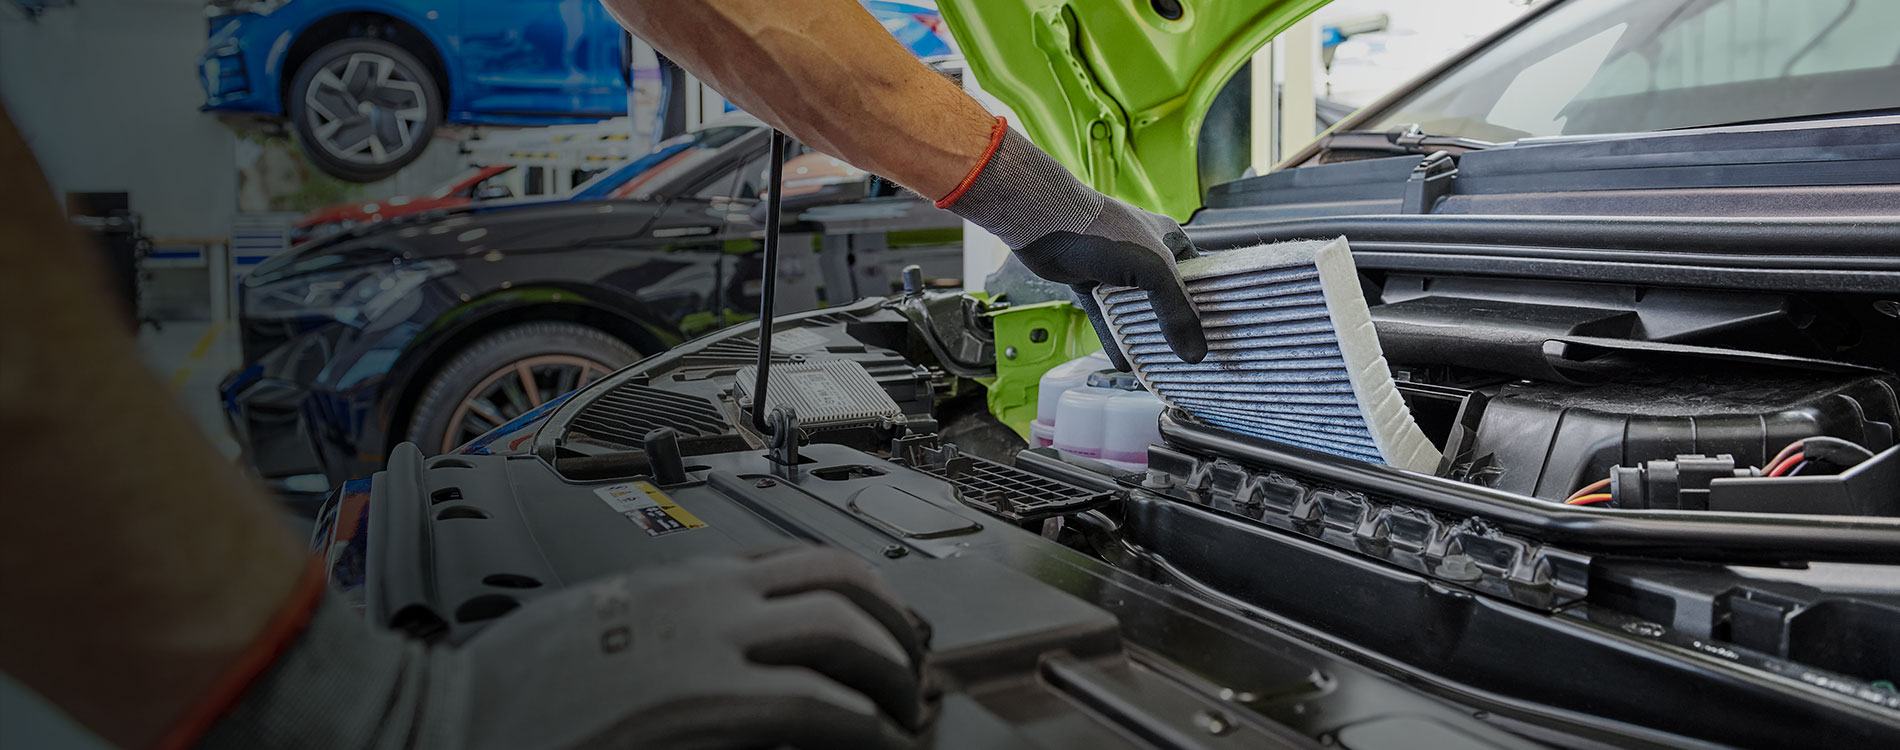 Pollen filter being replaced on a Skoda by a trained technician